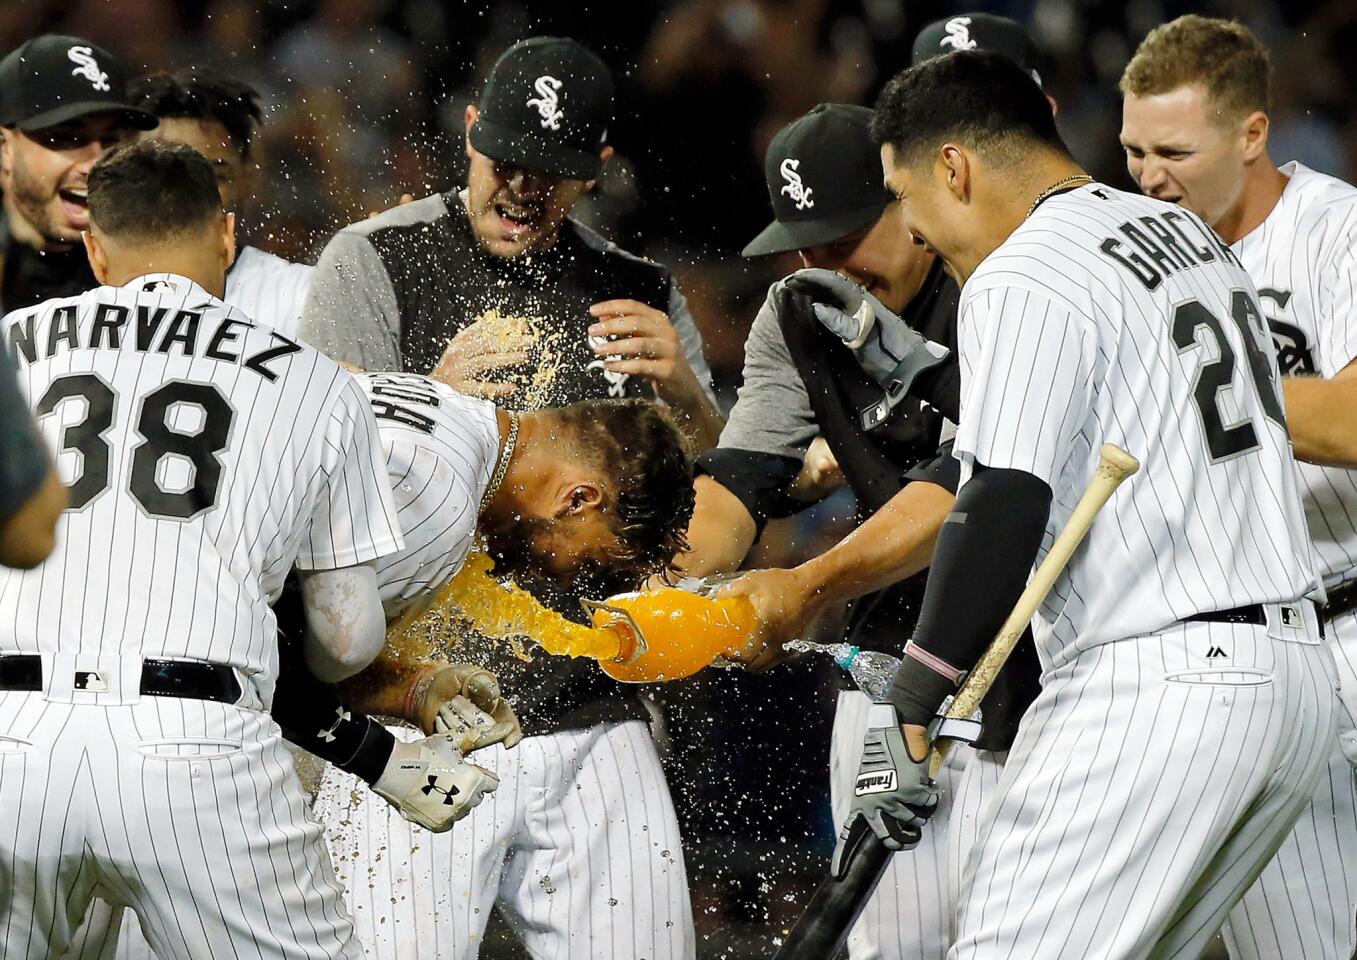 Yoan Moncada gets mobbed by teammates after hitting a walkoff RBI single against the Astros at Guaranteed Rate Field on Aug. 10, 2017.